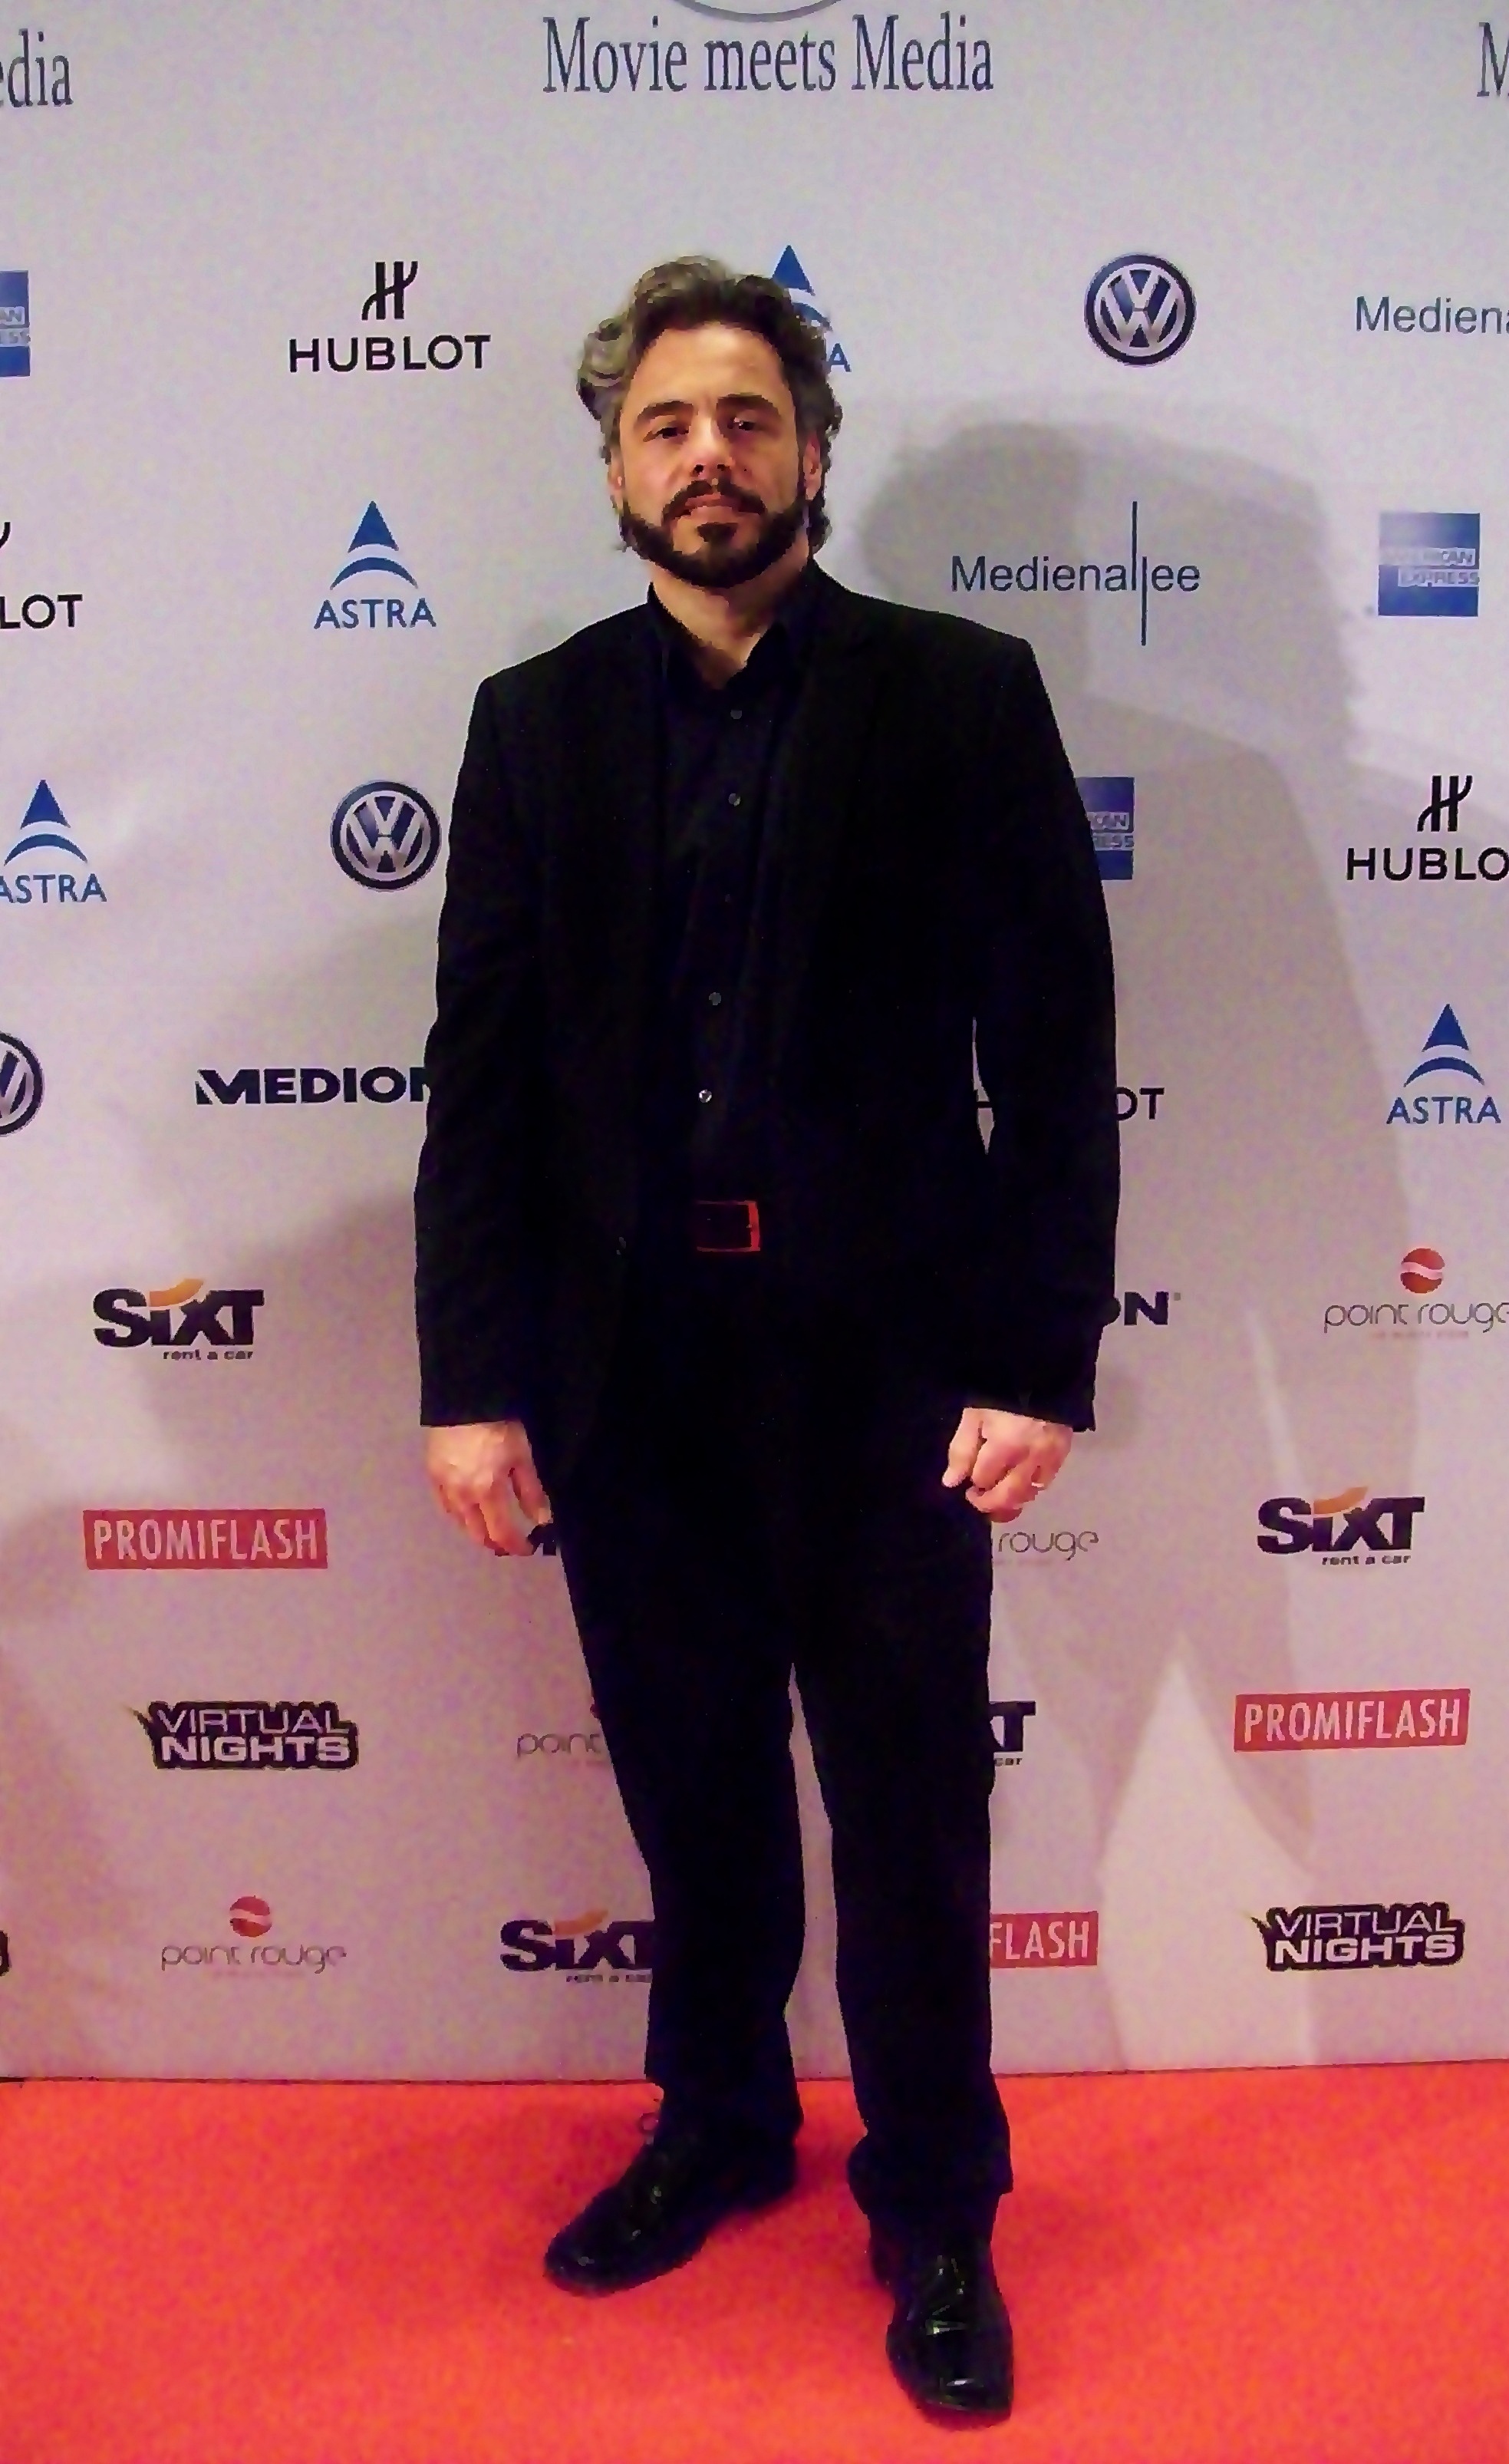 Movie Meets Media - Berlinale 2013 - Michael A. Calace